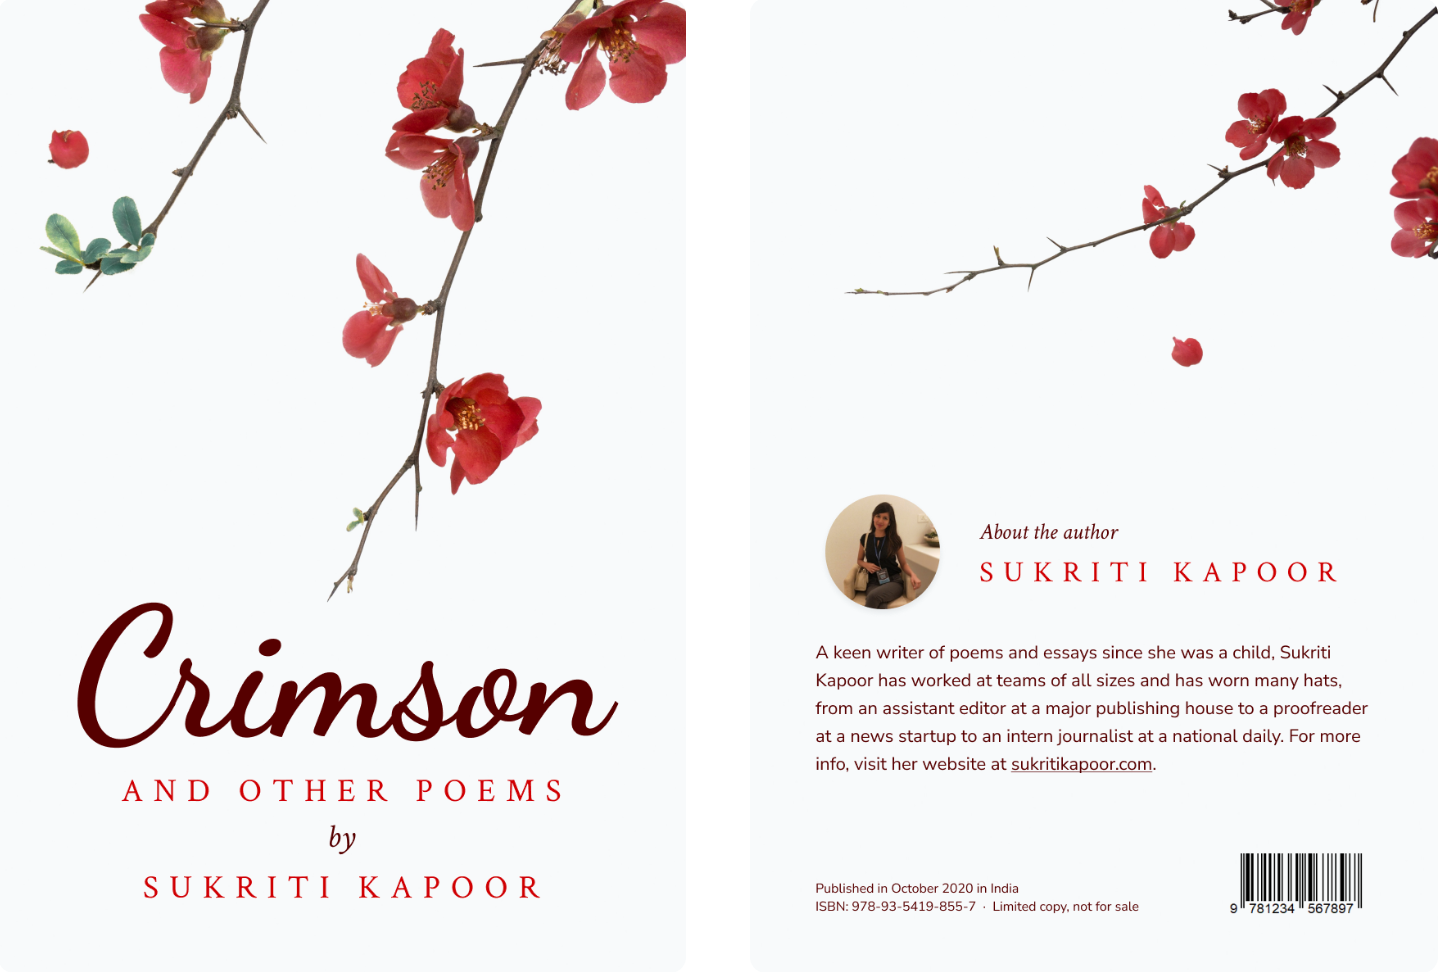 Crimson and Other Poems